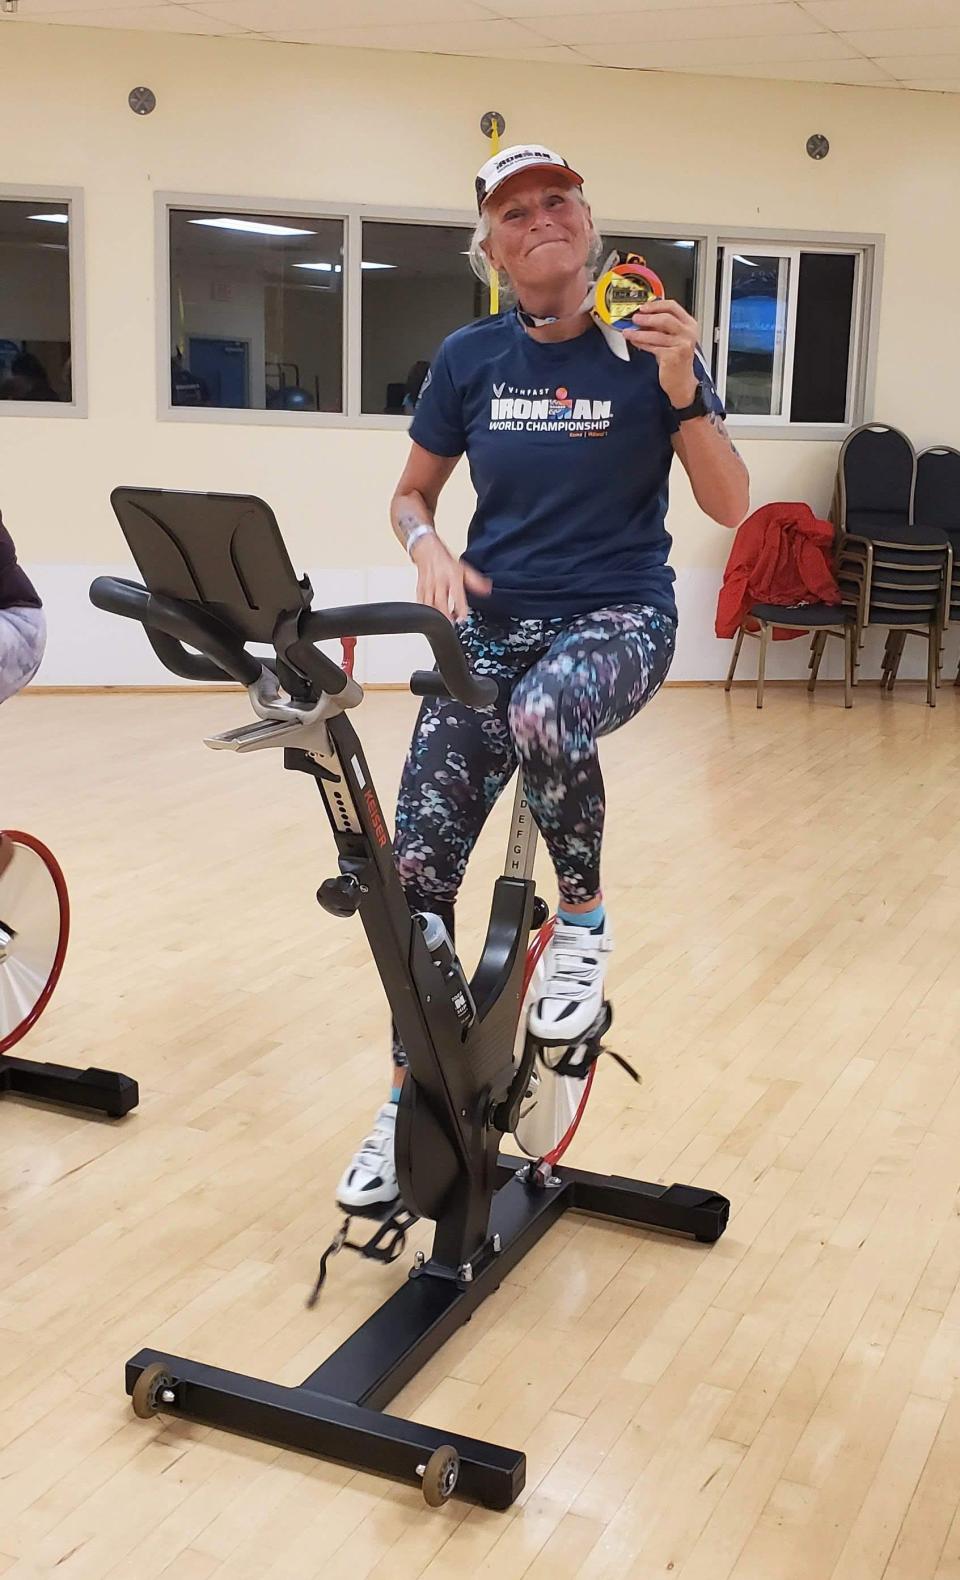 Leslie Maurice poses during an early morning spin class at the Bremerton YMCA. Maurice is a regular at the Y and on roads around Kitsap County, training as part of a passion for triathlons that she picked up several years ago.